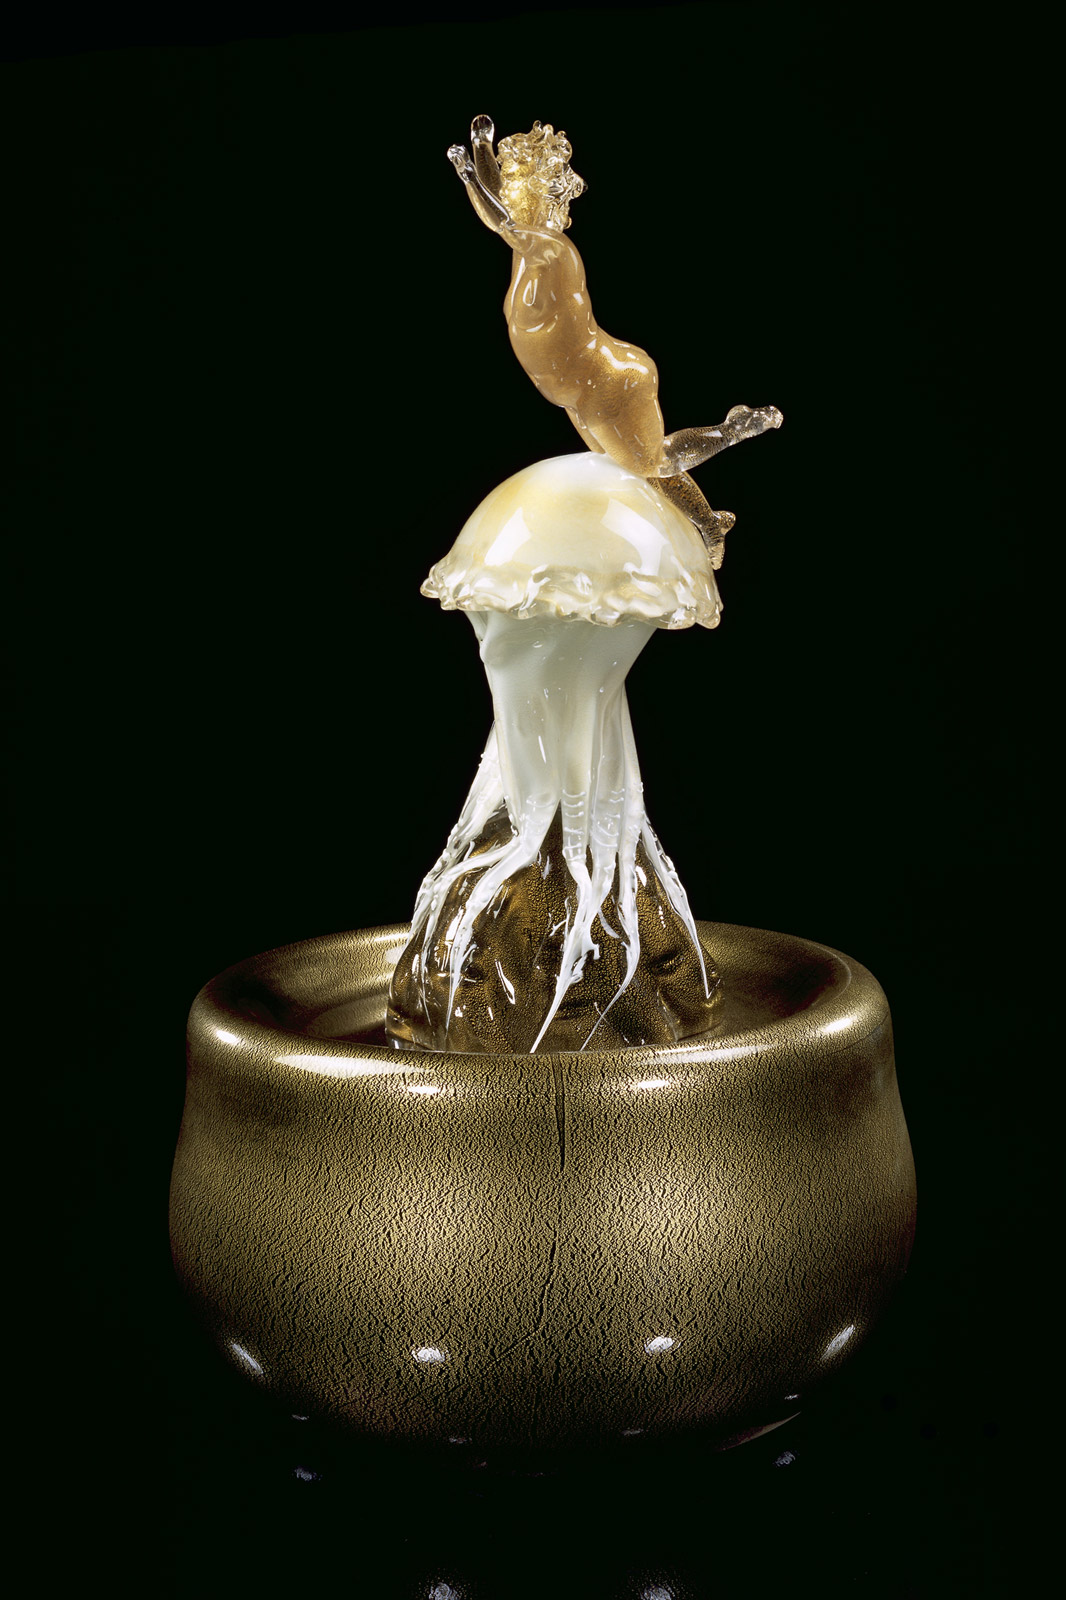 Dale Chihuly, Putto with Jellyfish atop Golden Vessel, 2000